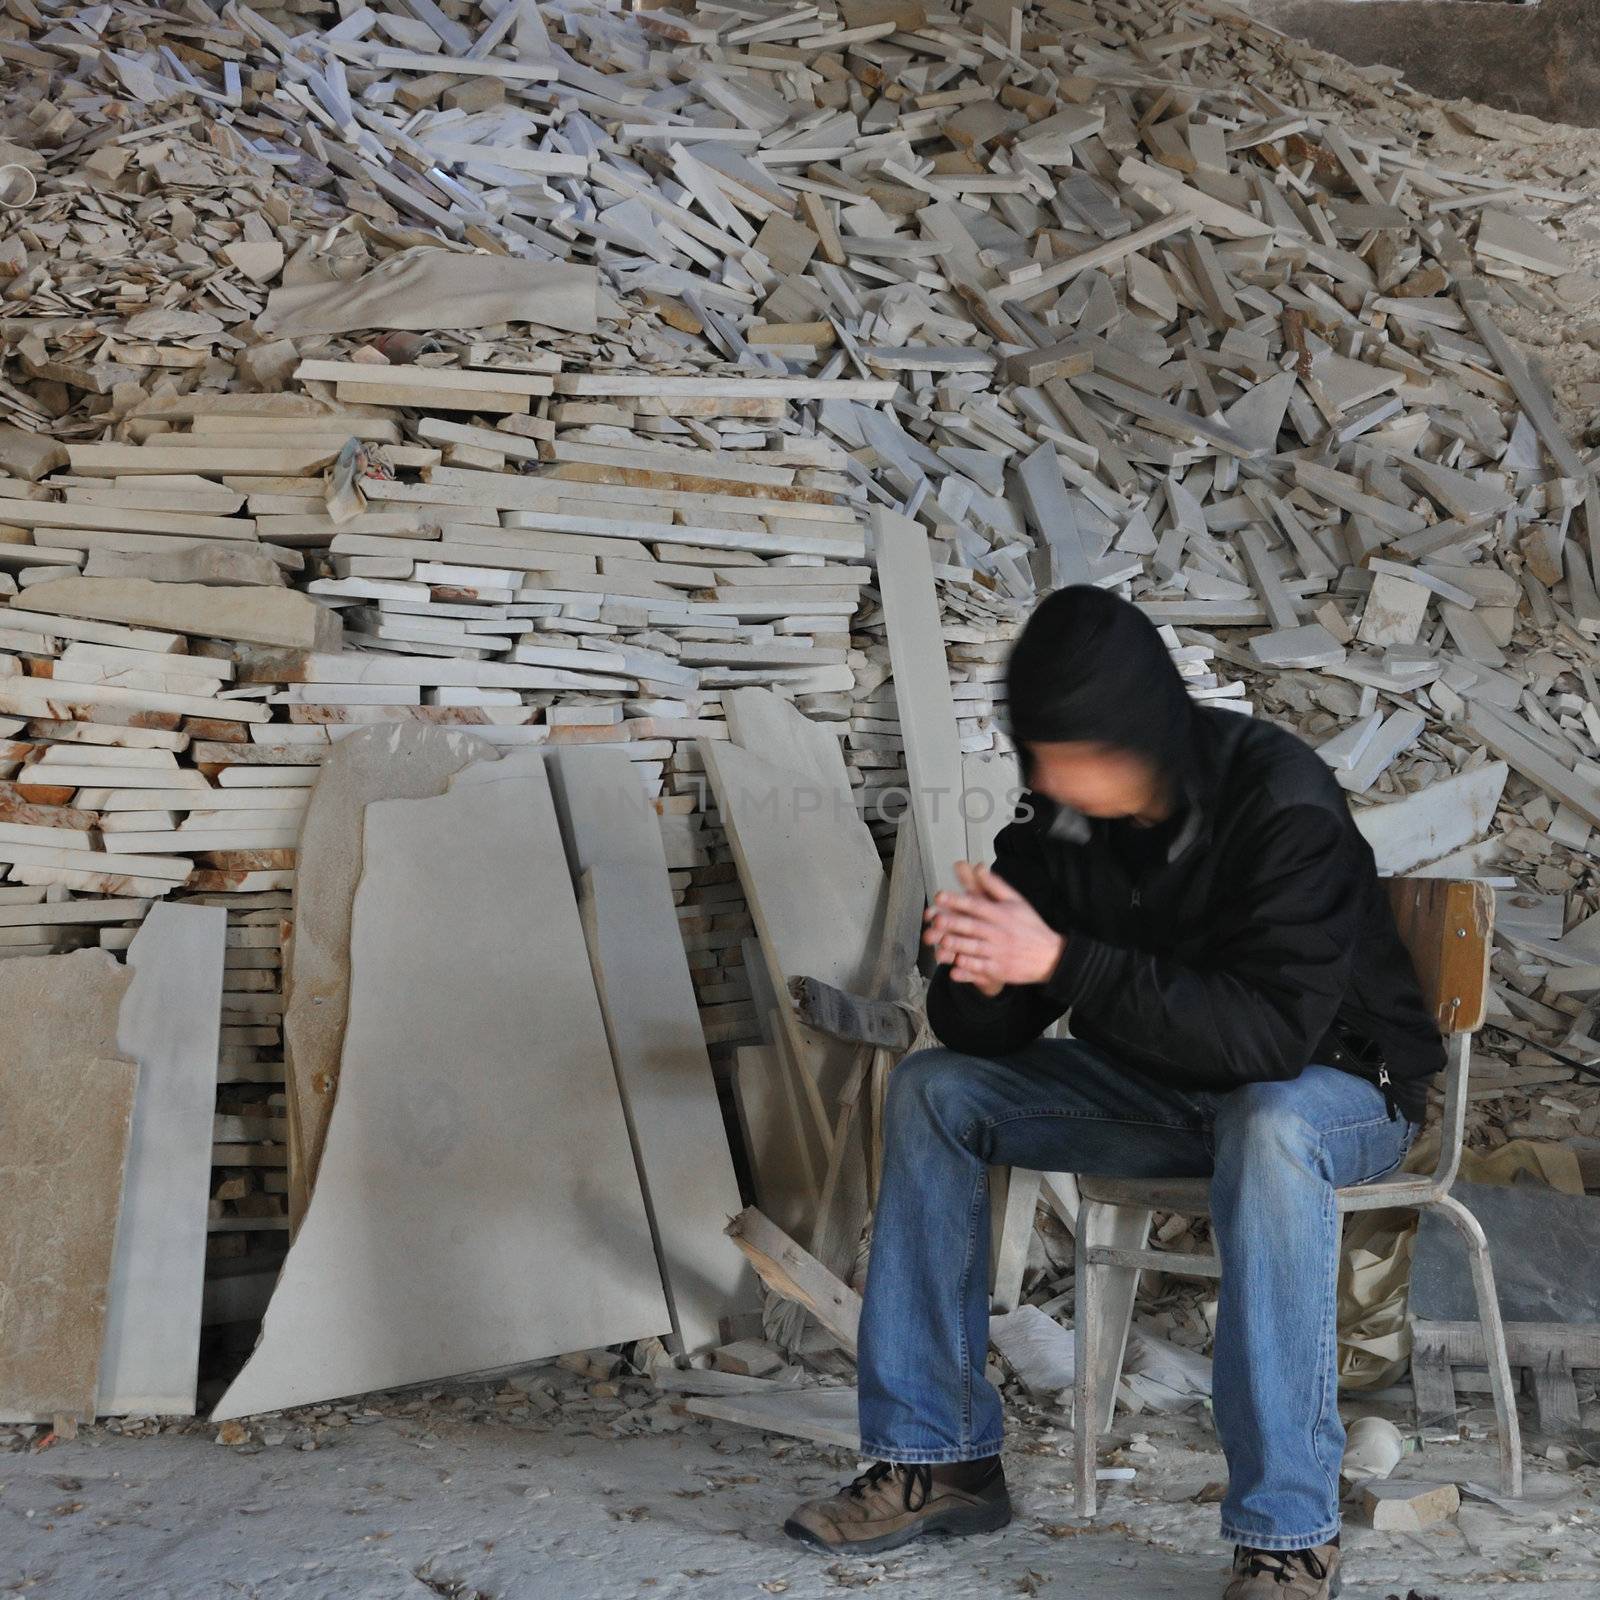 Motion blurred man sitting next to a pile of marble fragments in abandoned interior.